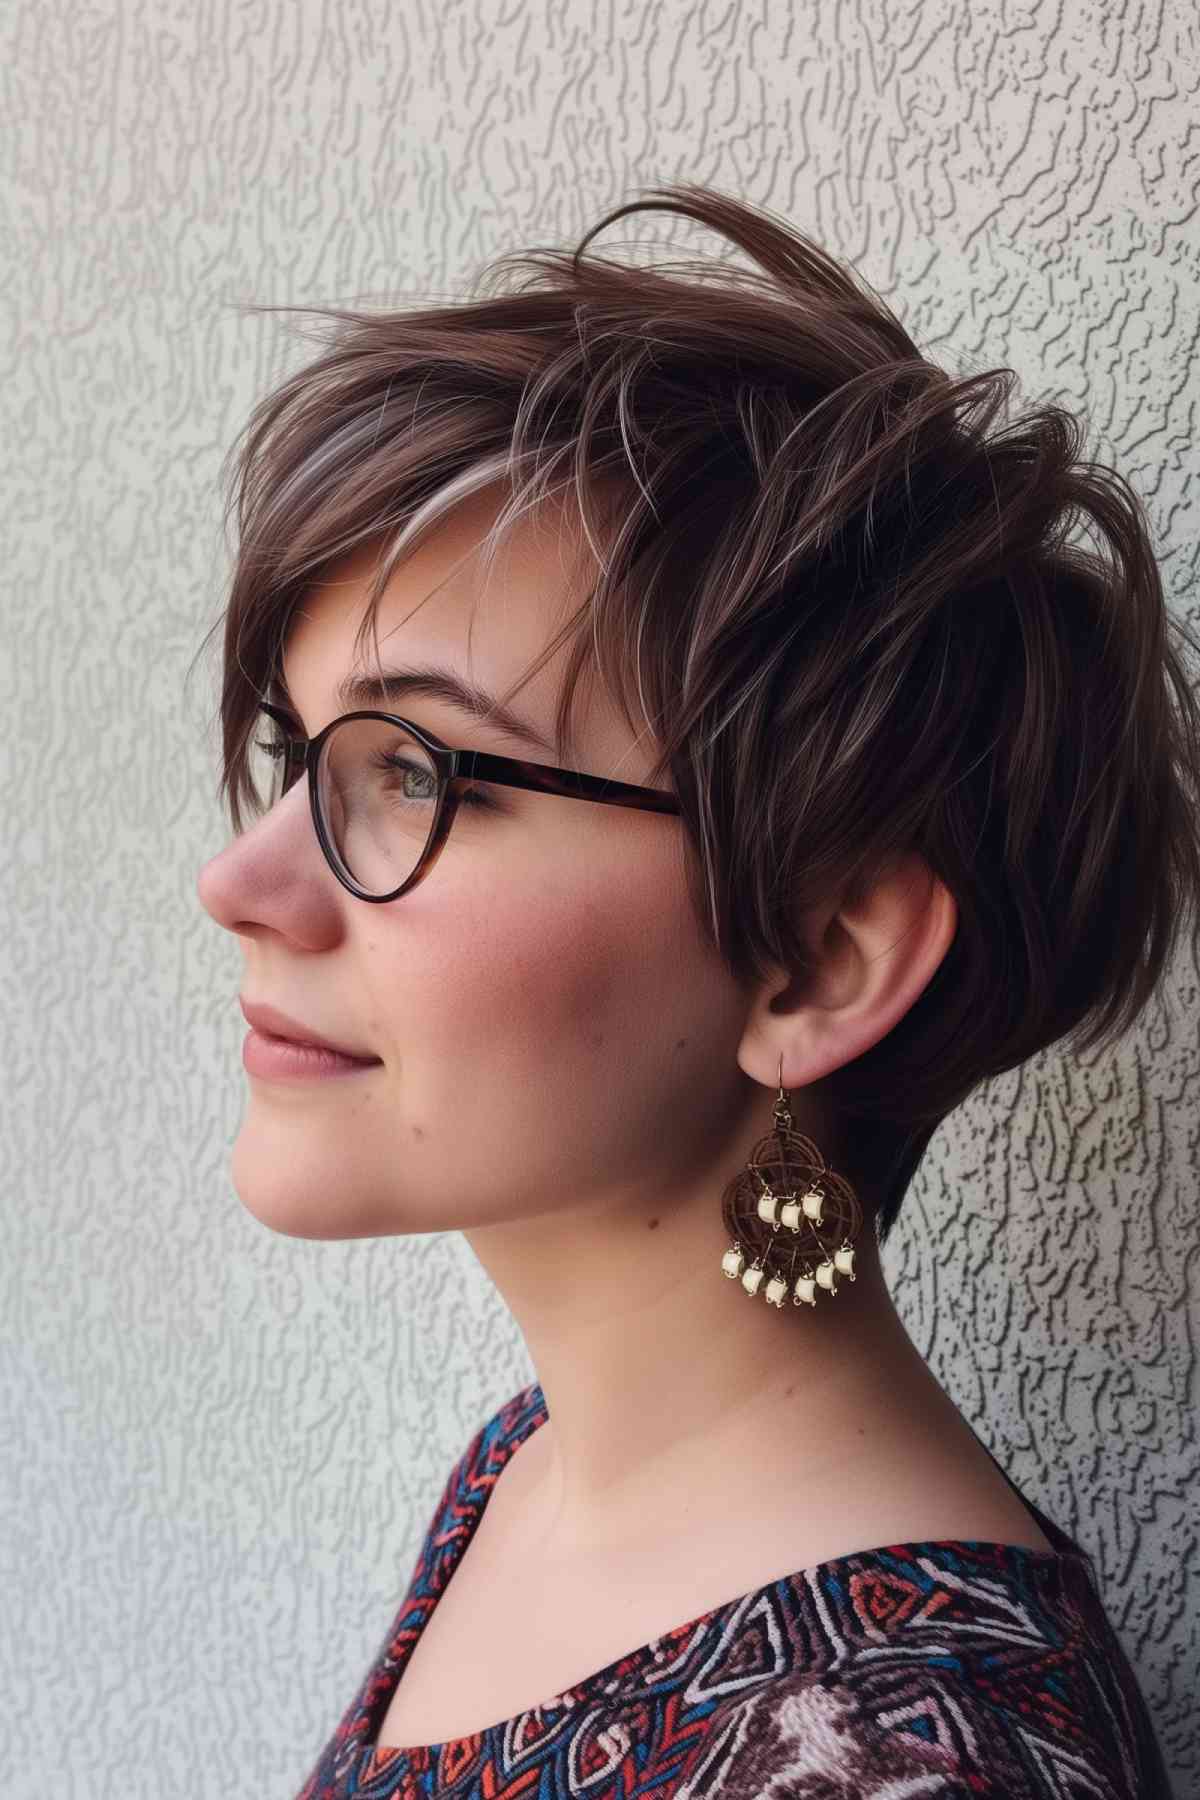 Young woman with wavy, short pixie cut and sweeping bangs, wearing glasses and statement earrings